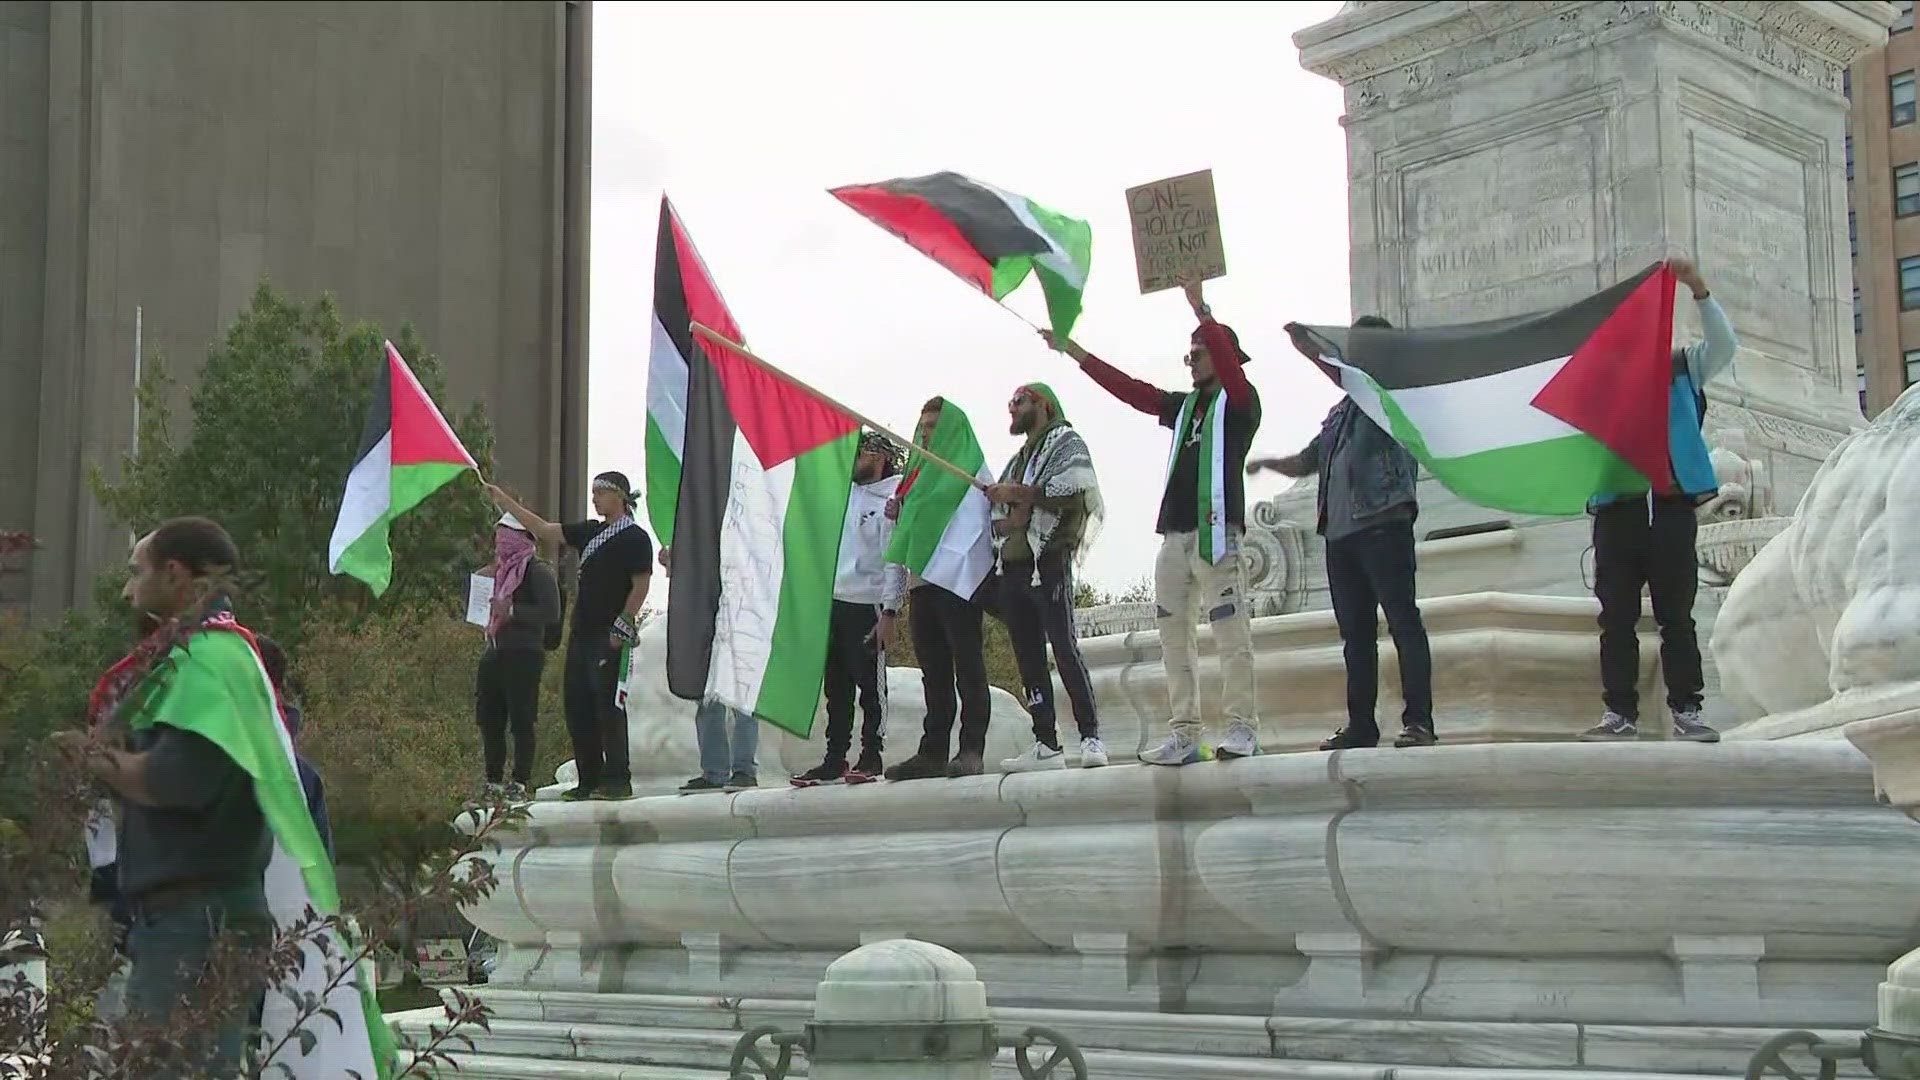 Rally in support of Palestine in Niagara Square